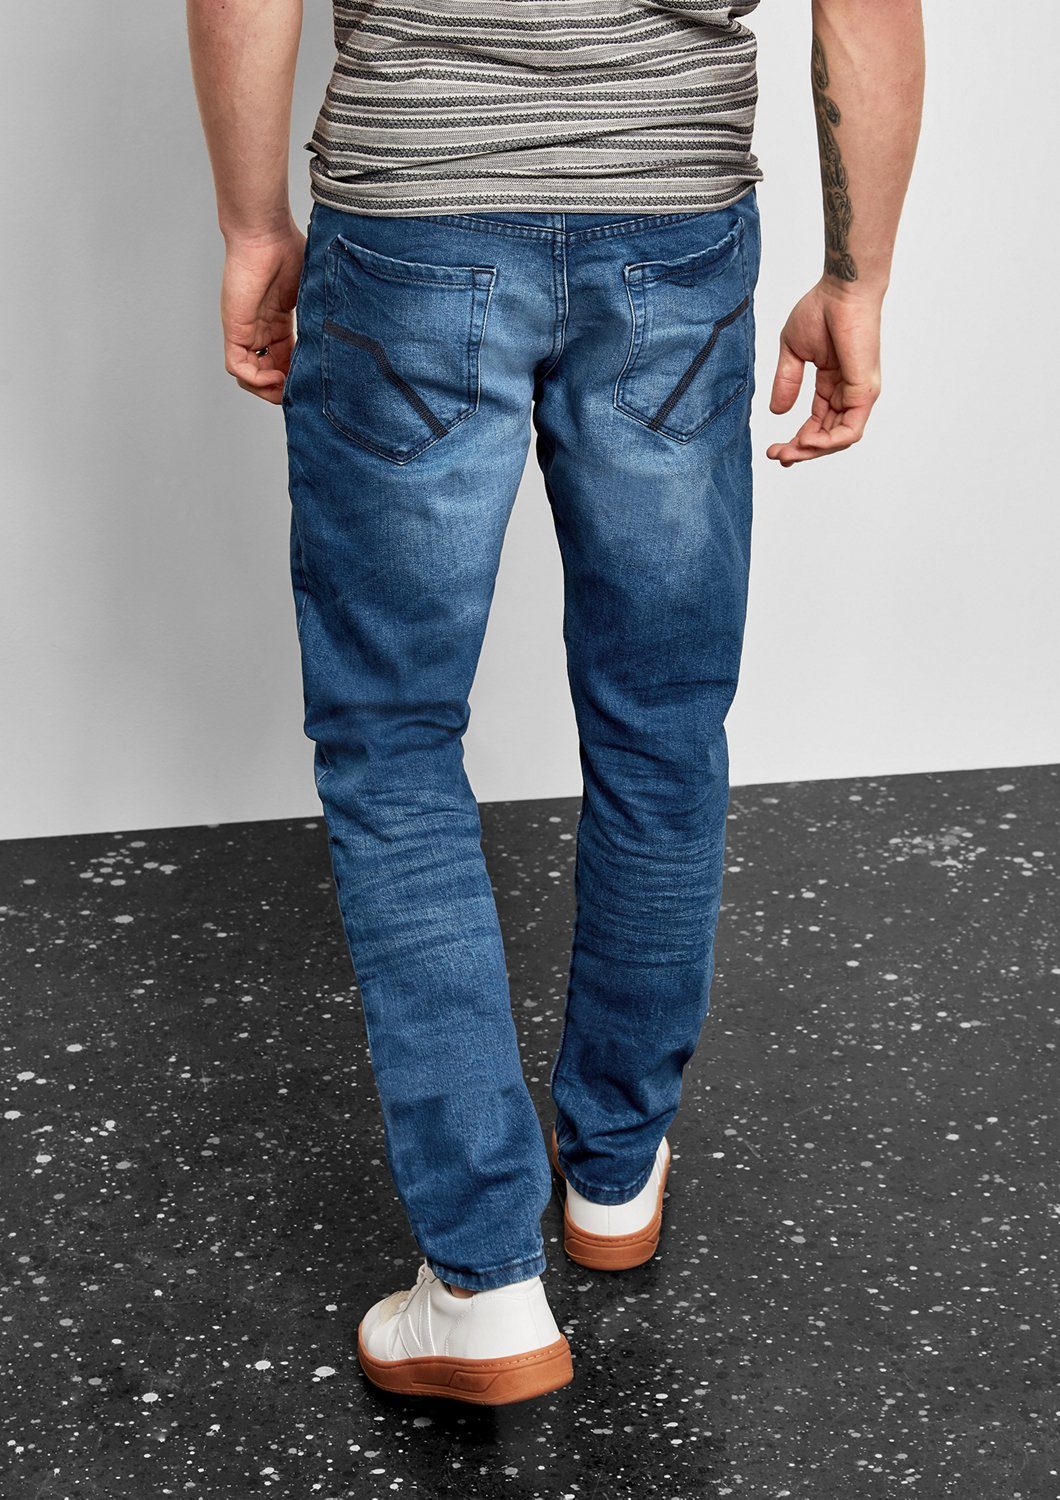 Otto - Q/s Designed By NU 15% KORTING: Q/S designed by Rick slim: smalle stretchjeans